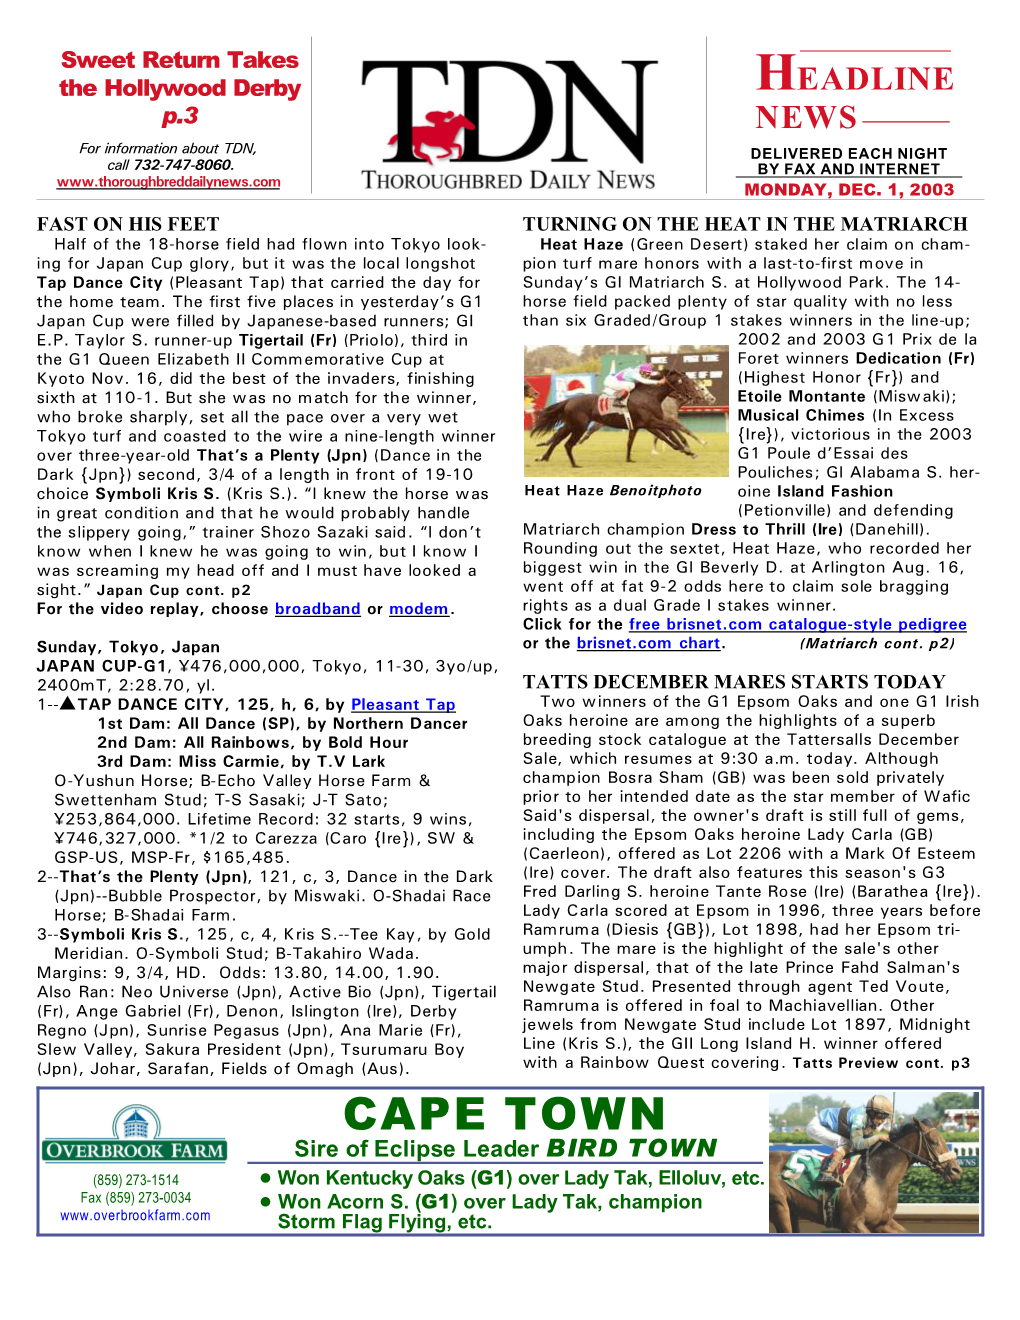 CAPE TOWN Sire of Eclipse Leader BIRD TOWN (859) 273-1514 ! Won Kentucky Oaks (G1) Over Lady Tak, Elloluv, Etc